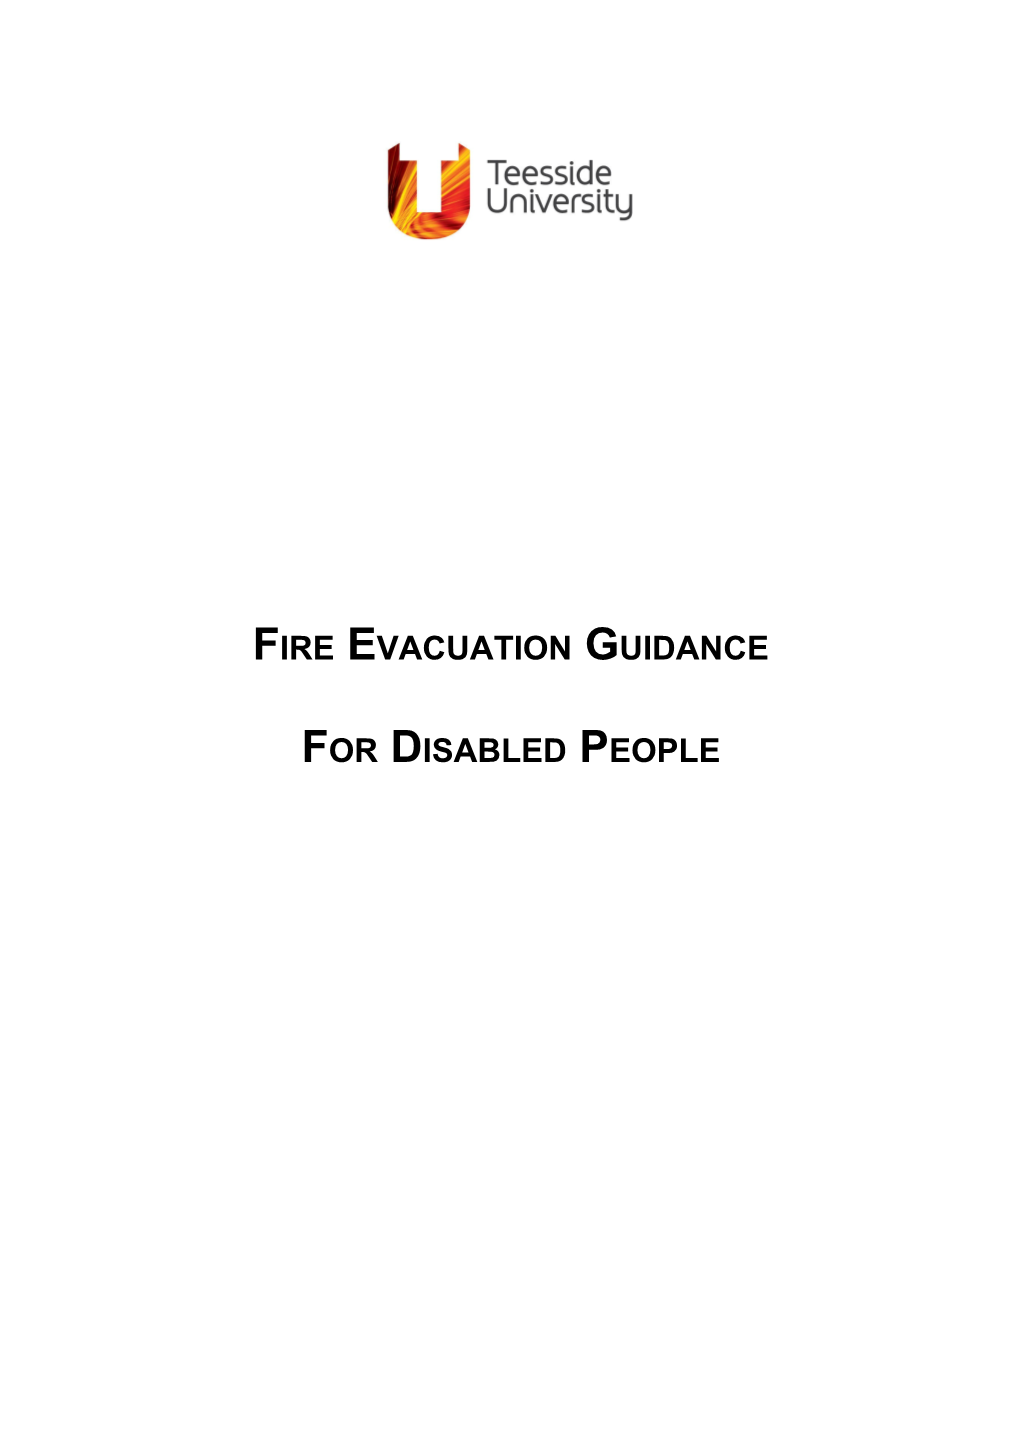 Fire Evacuation Procedures for Disabled People